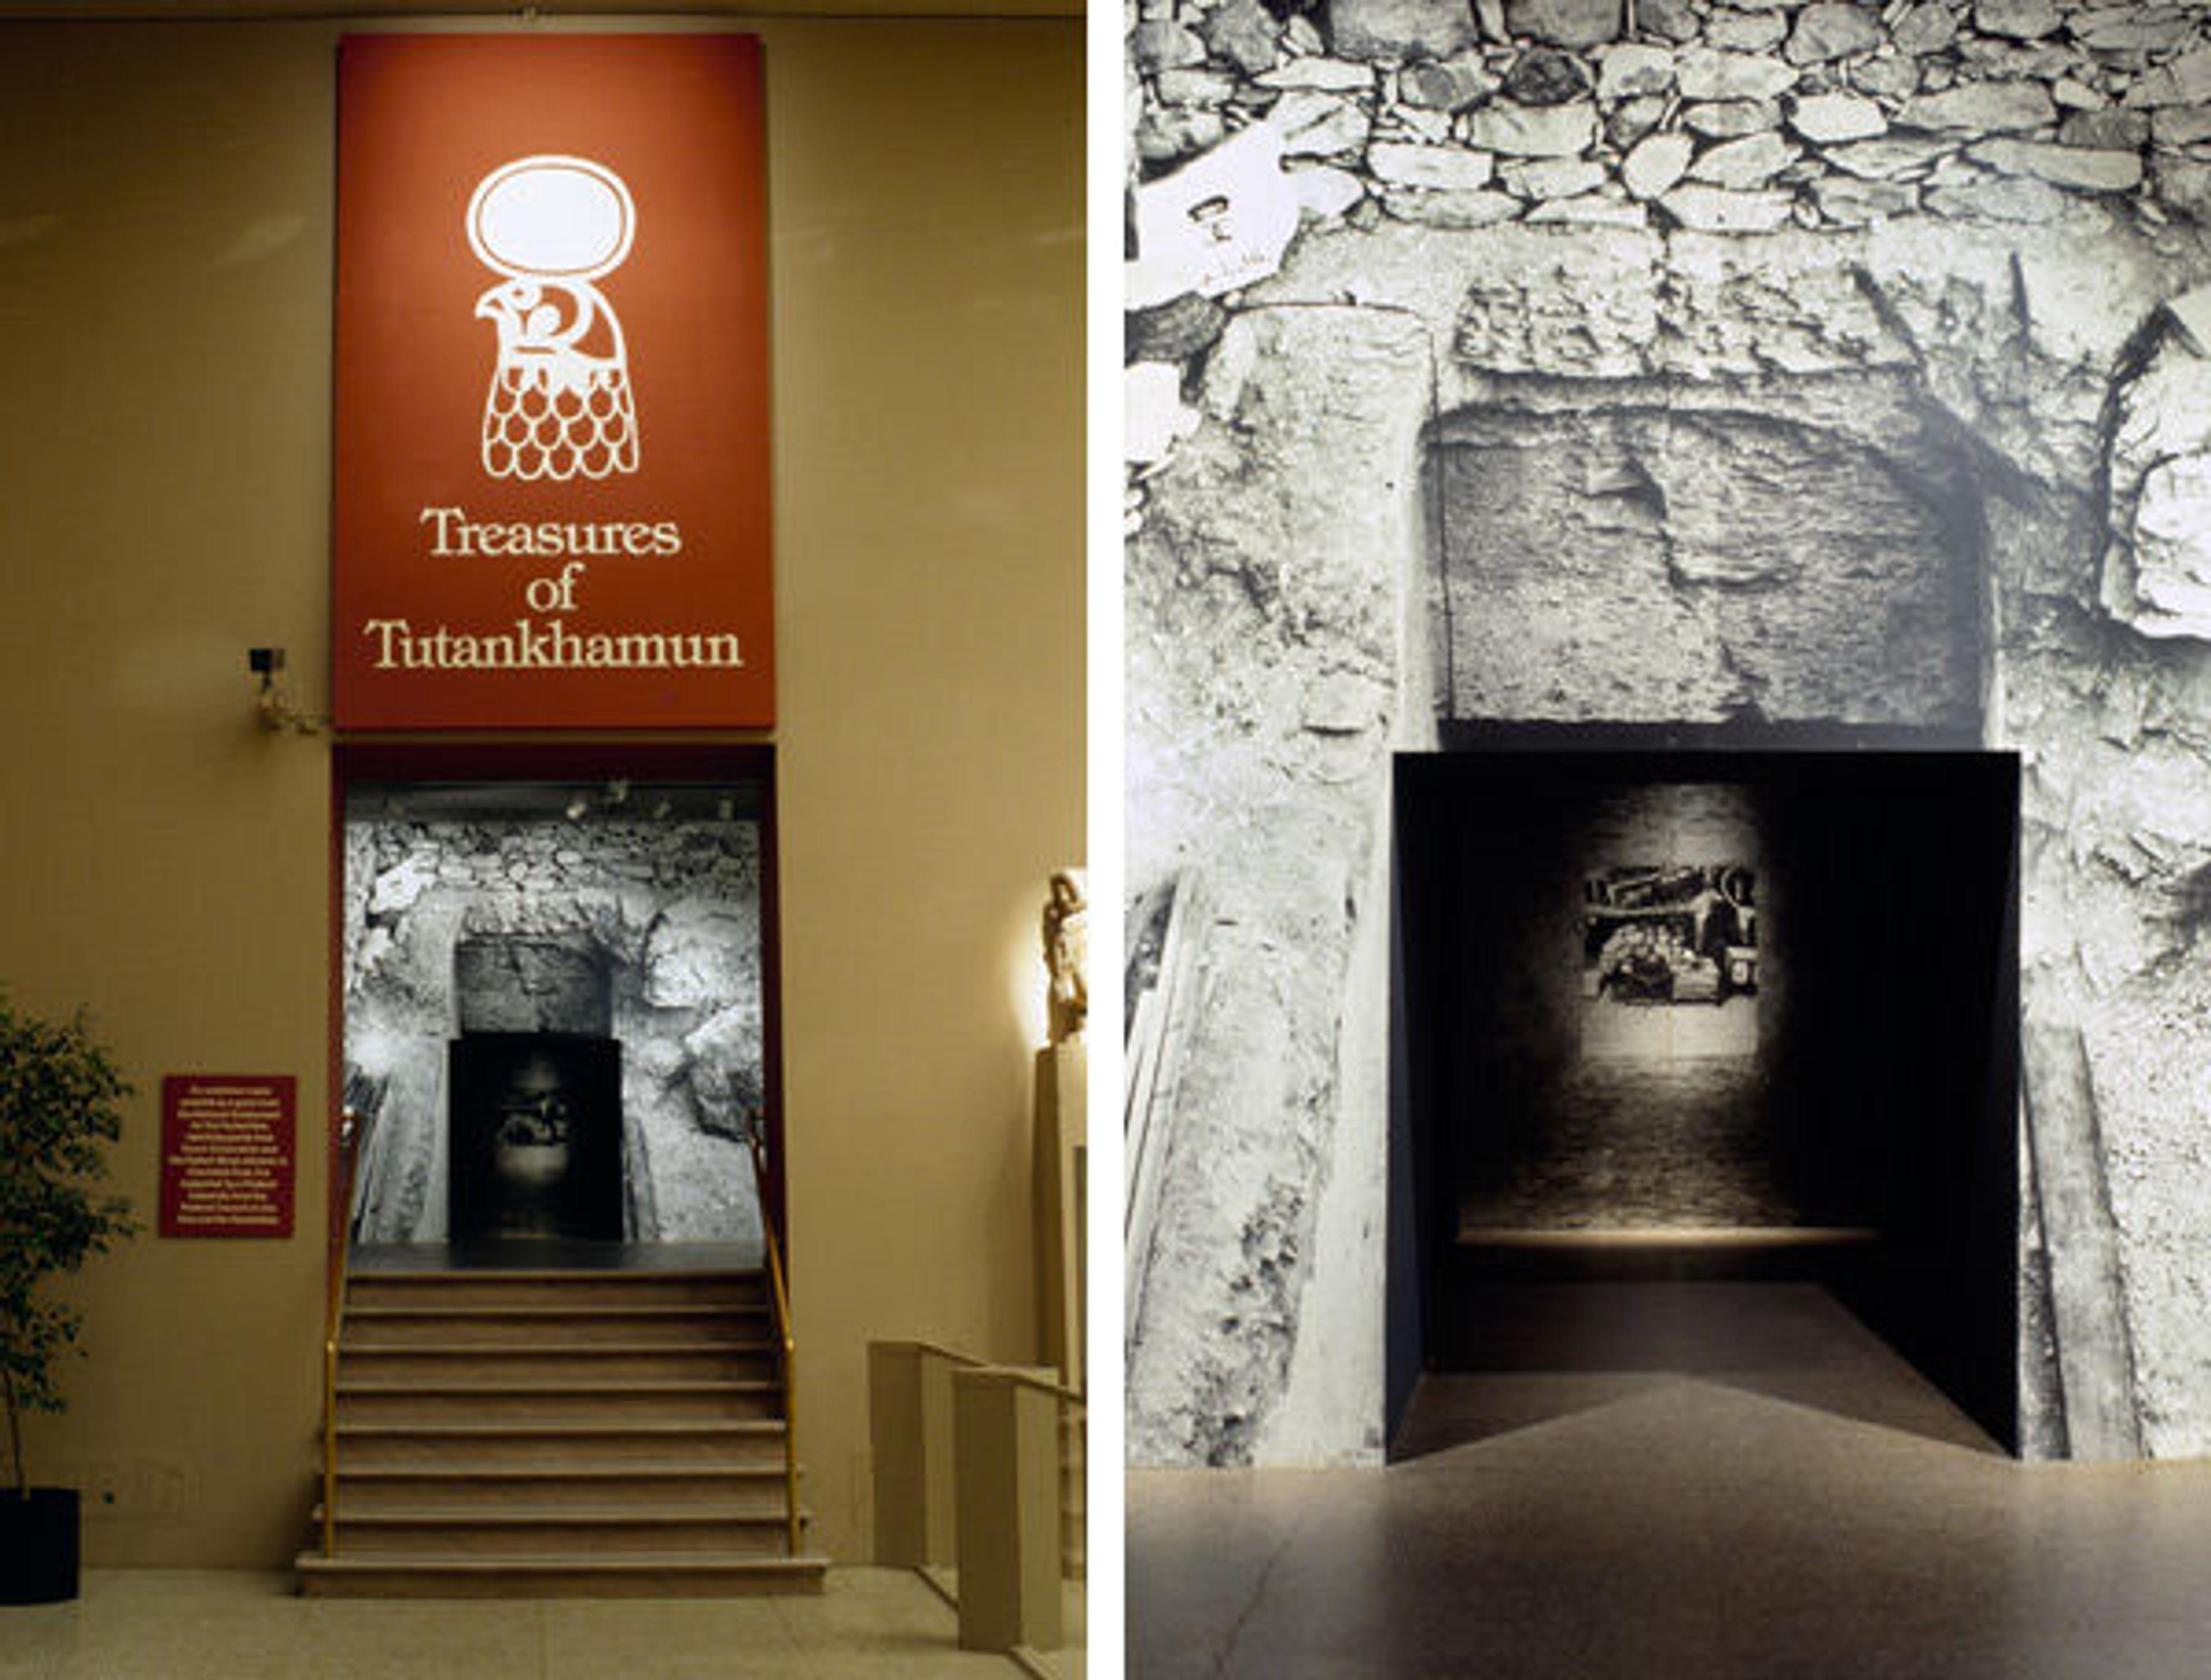 Left: View of the entrance to the exhibition Treasures of Tutankhamun, on view December 20, 1978–April 15, 1979. Photo by Al Mozell. © The Metropolitan Museum of Art. Right: Photo mural of the entrance to the tomb featured in the exhibition Treasures of Tutankhamun. Photo by Al Mozell. © The Metropolitan Museum of Art